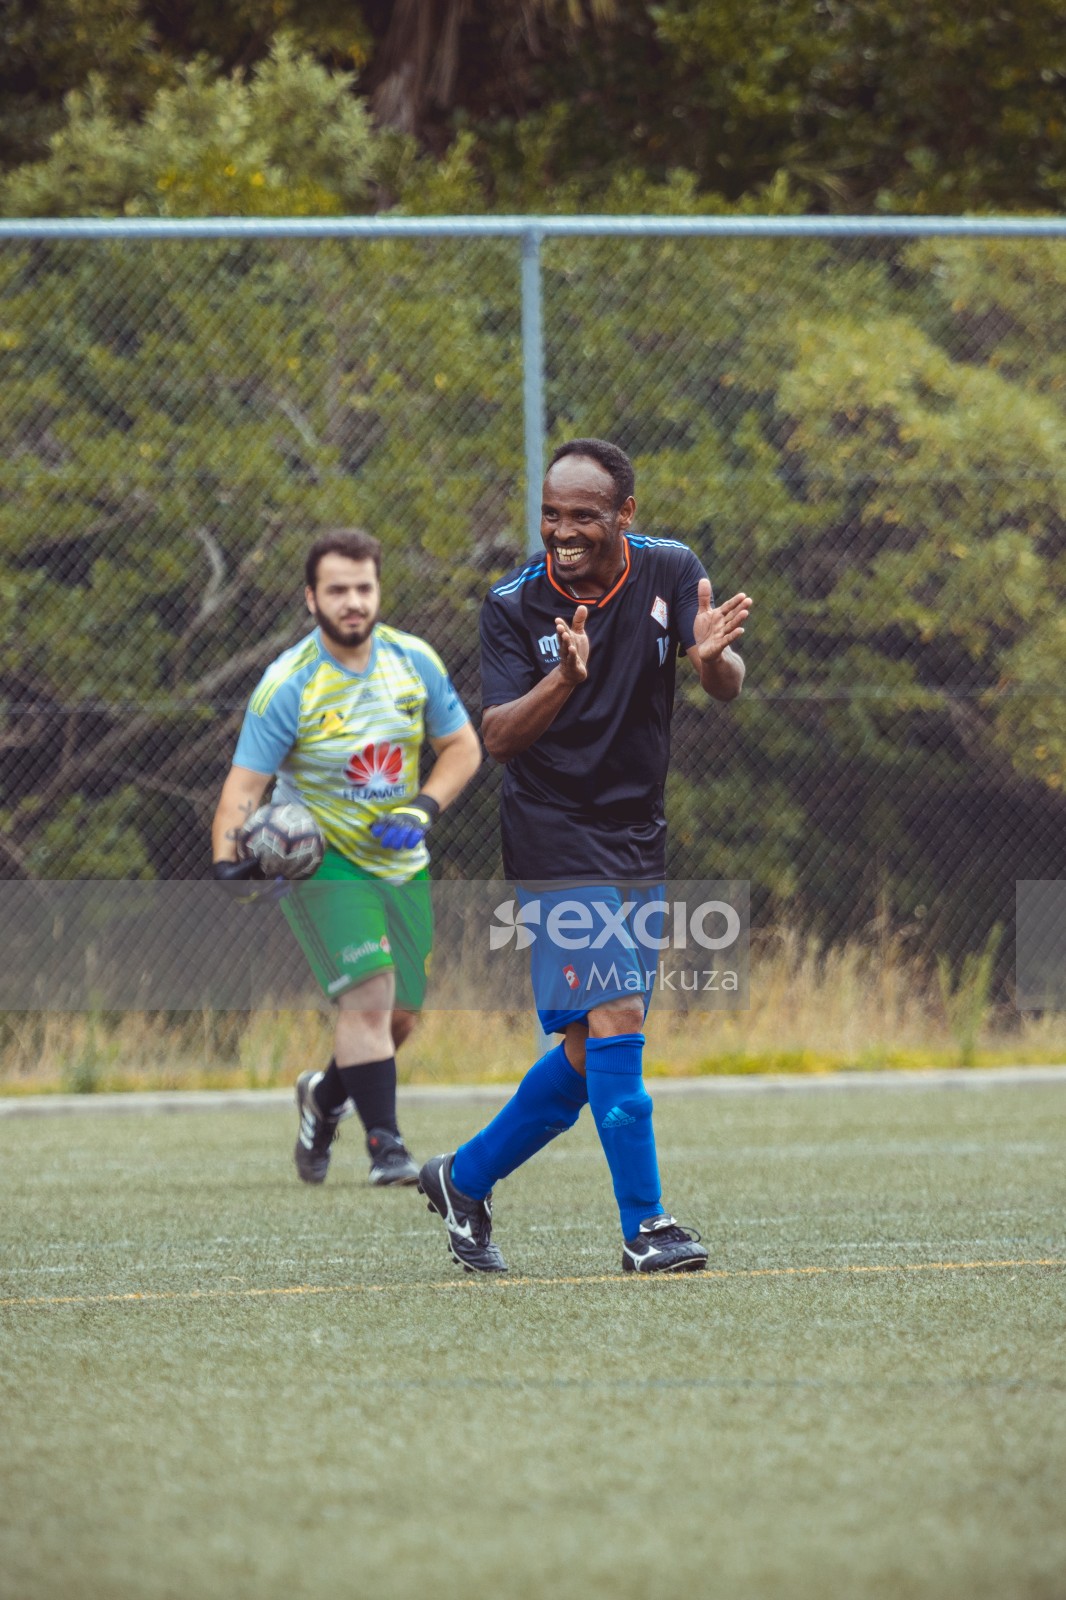 Football player in black shirt clapping - Sports Zone sunday league